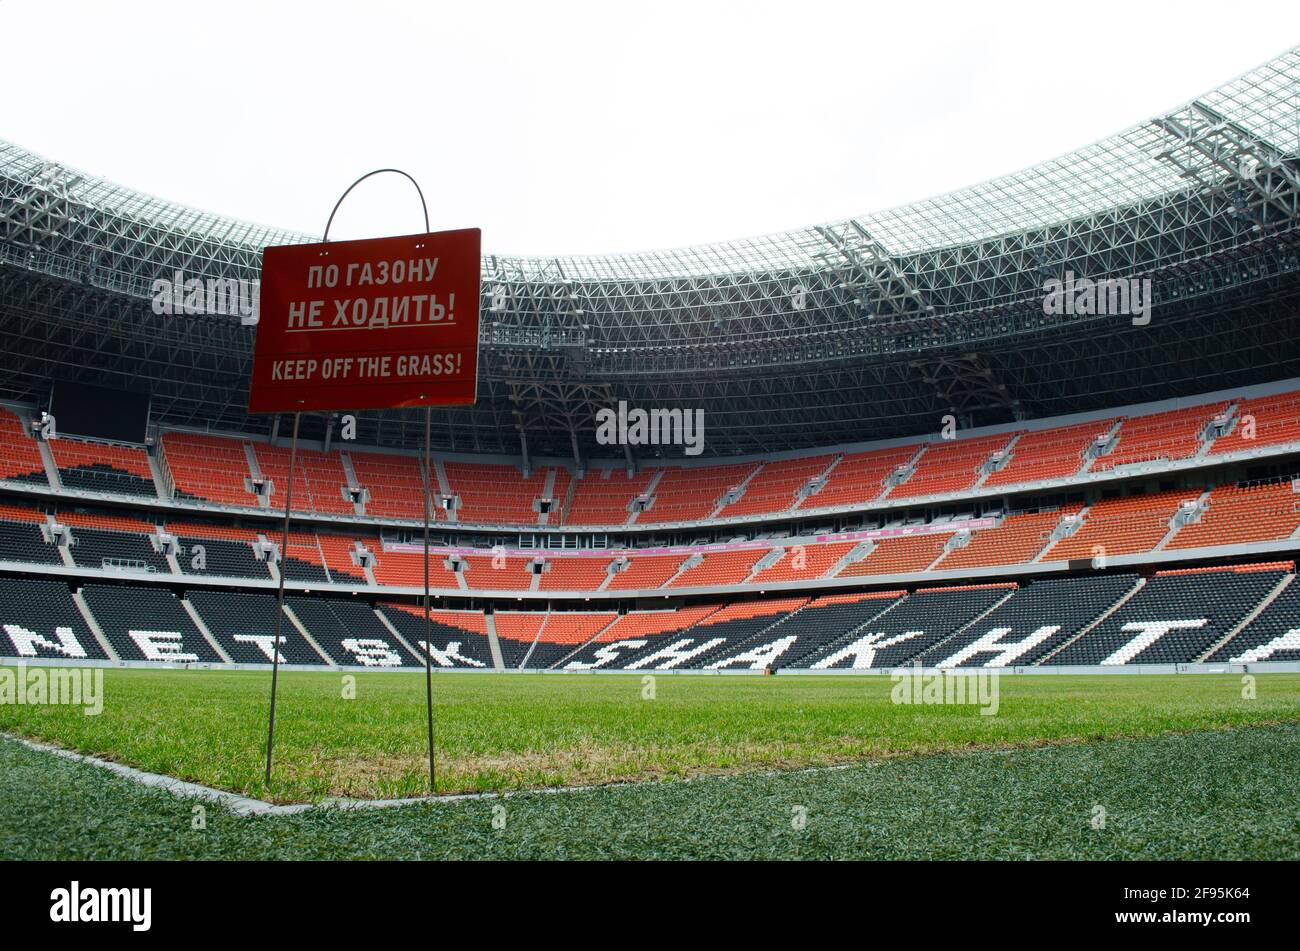 April 16, 2021. Donetsk region, Ukraine. The stands at the Donbass Arena stadium of the football club Shakhtar (Donetsk) in the self-proclaimed Donetsk People's Republic. Now the stadium does not accept matches. Stock Photo